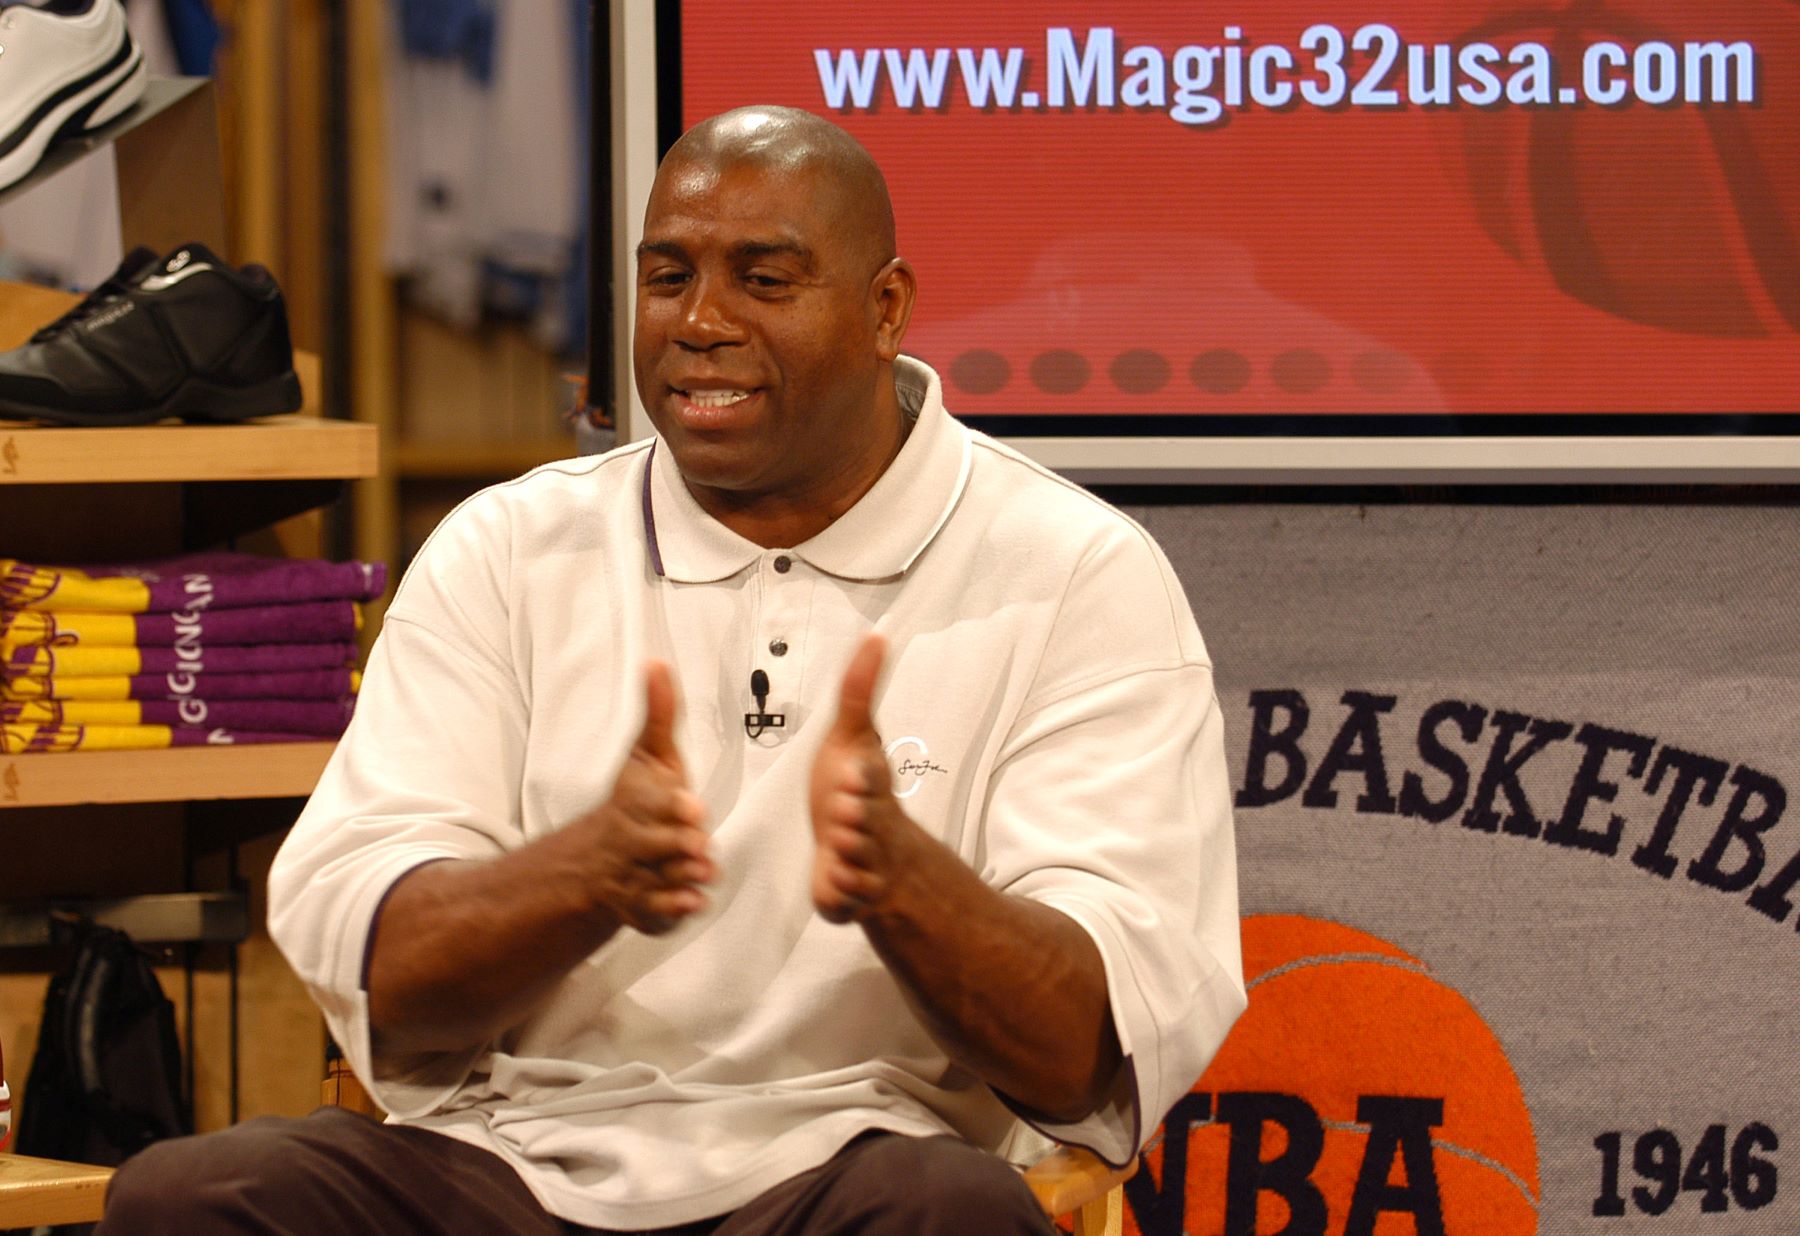 How Much Money Did Magic Johnson Make From His 1979 Deal With Converse?